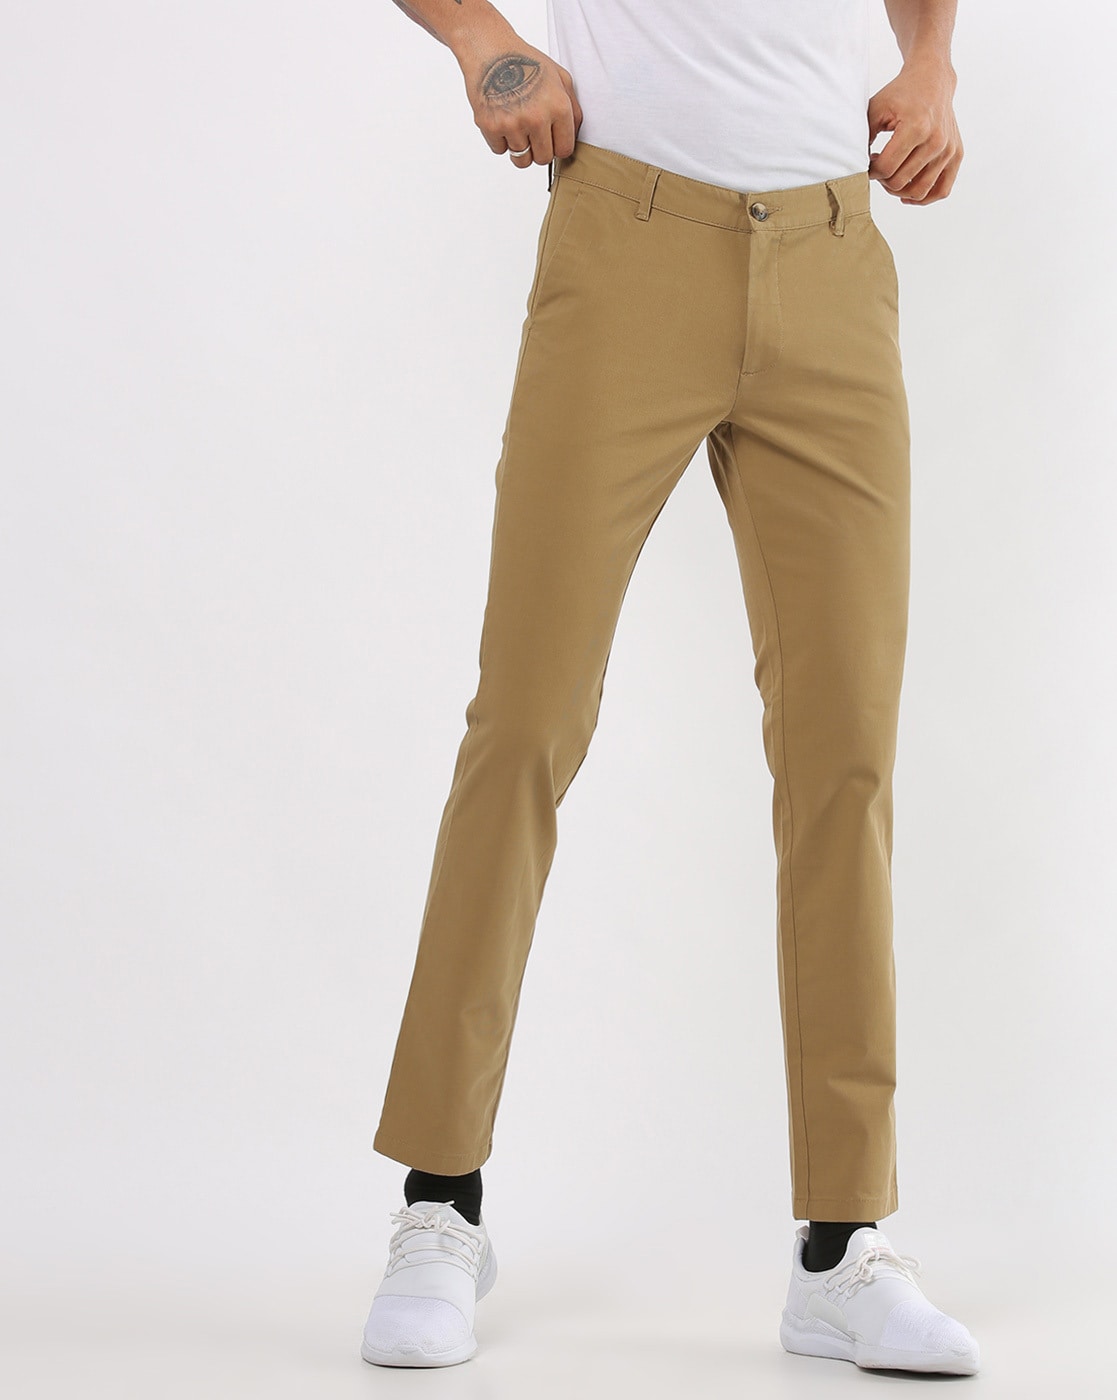 Ankle Length Jeans - Shop Ankle Length Jeans Online | Myntra